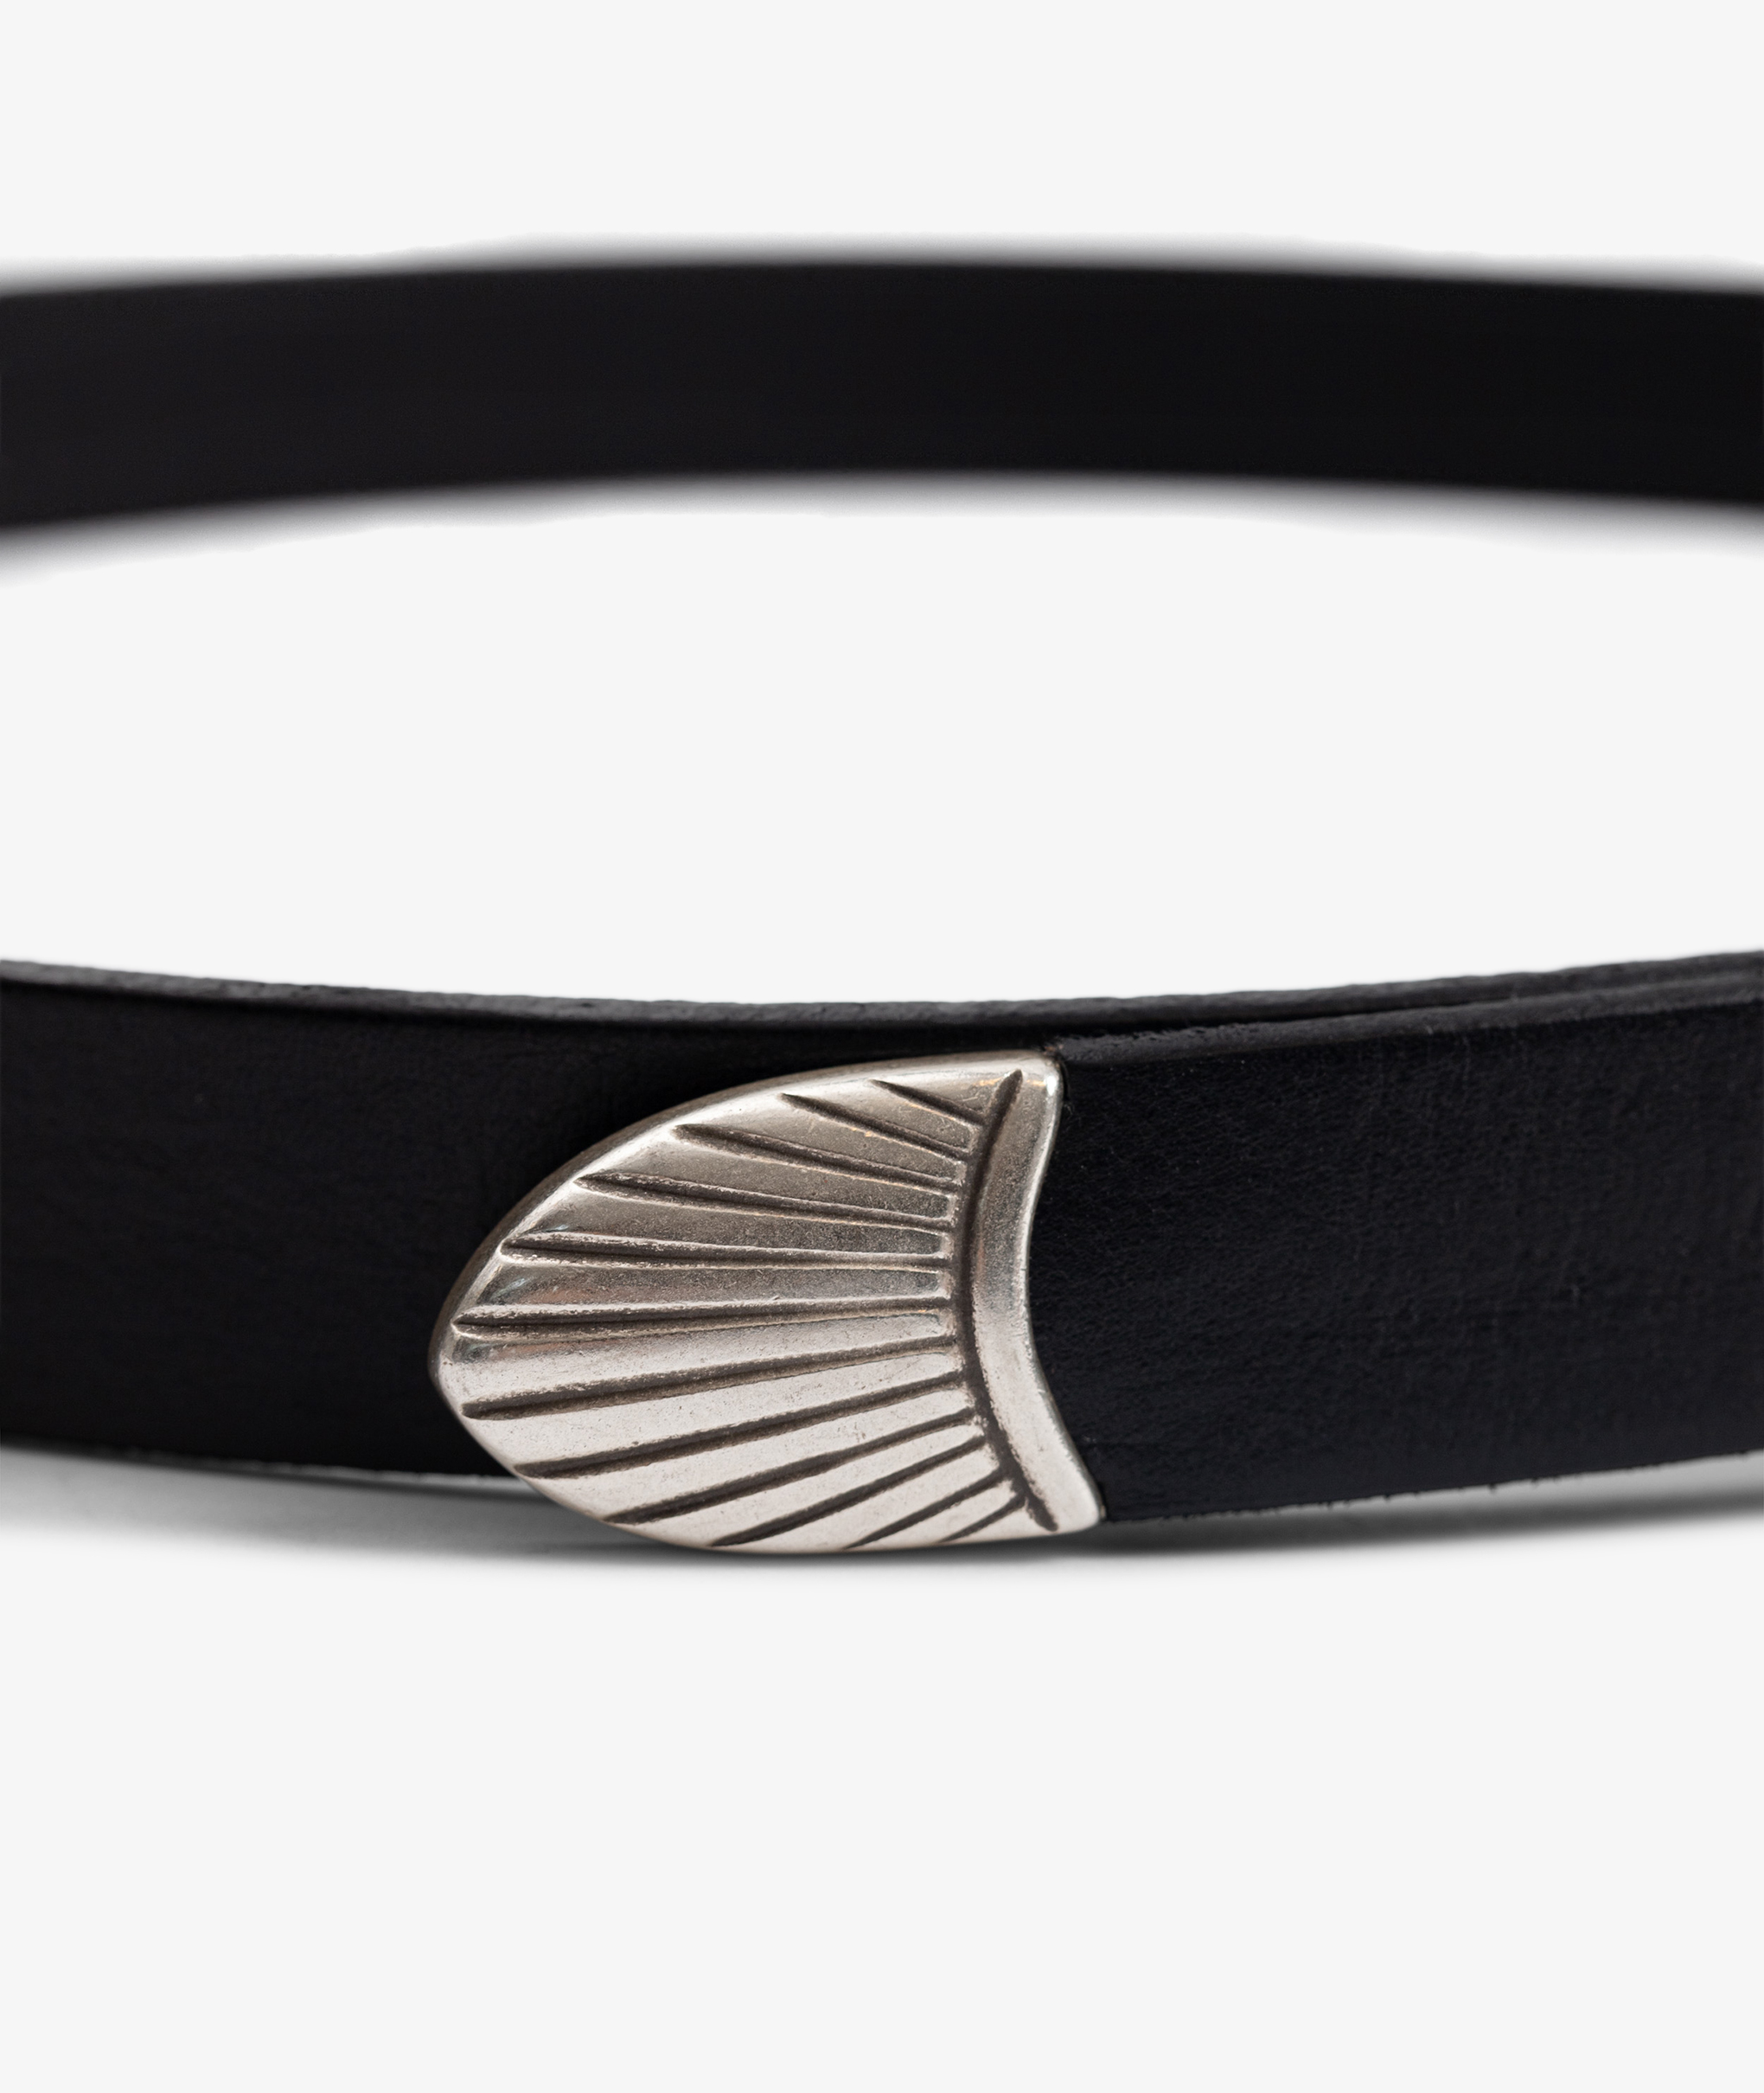 Norse Store  Shipping Worldwide - Anderson's Buckled Leather Belt - Black